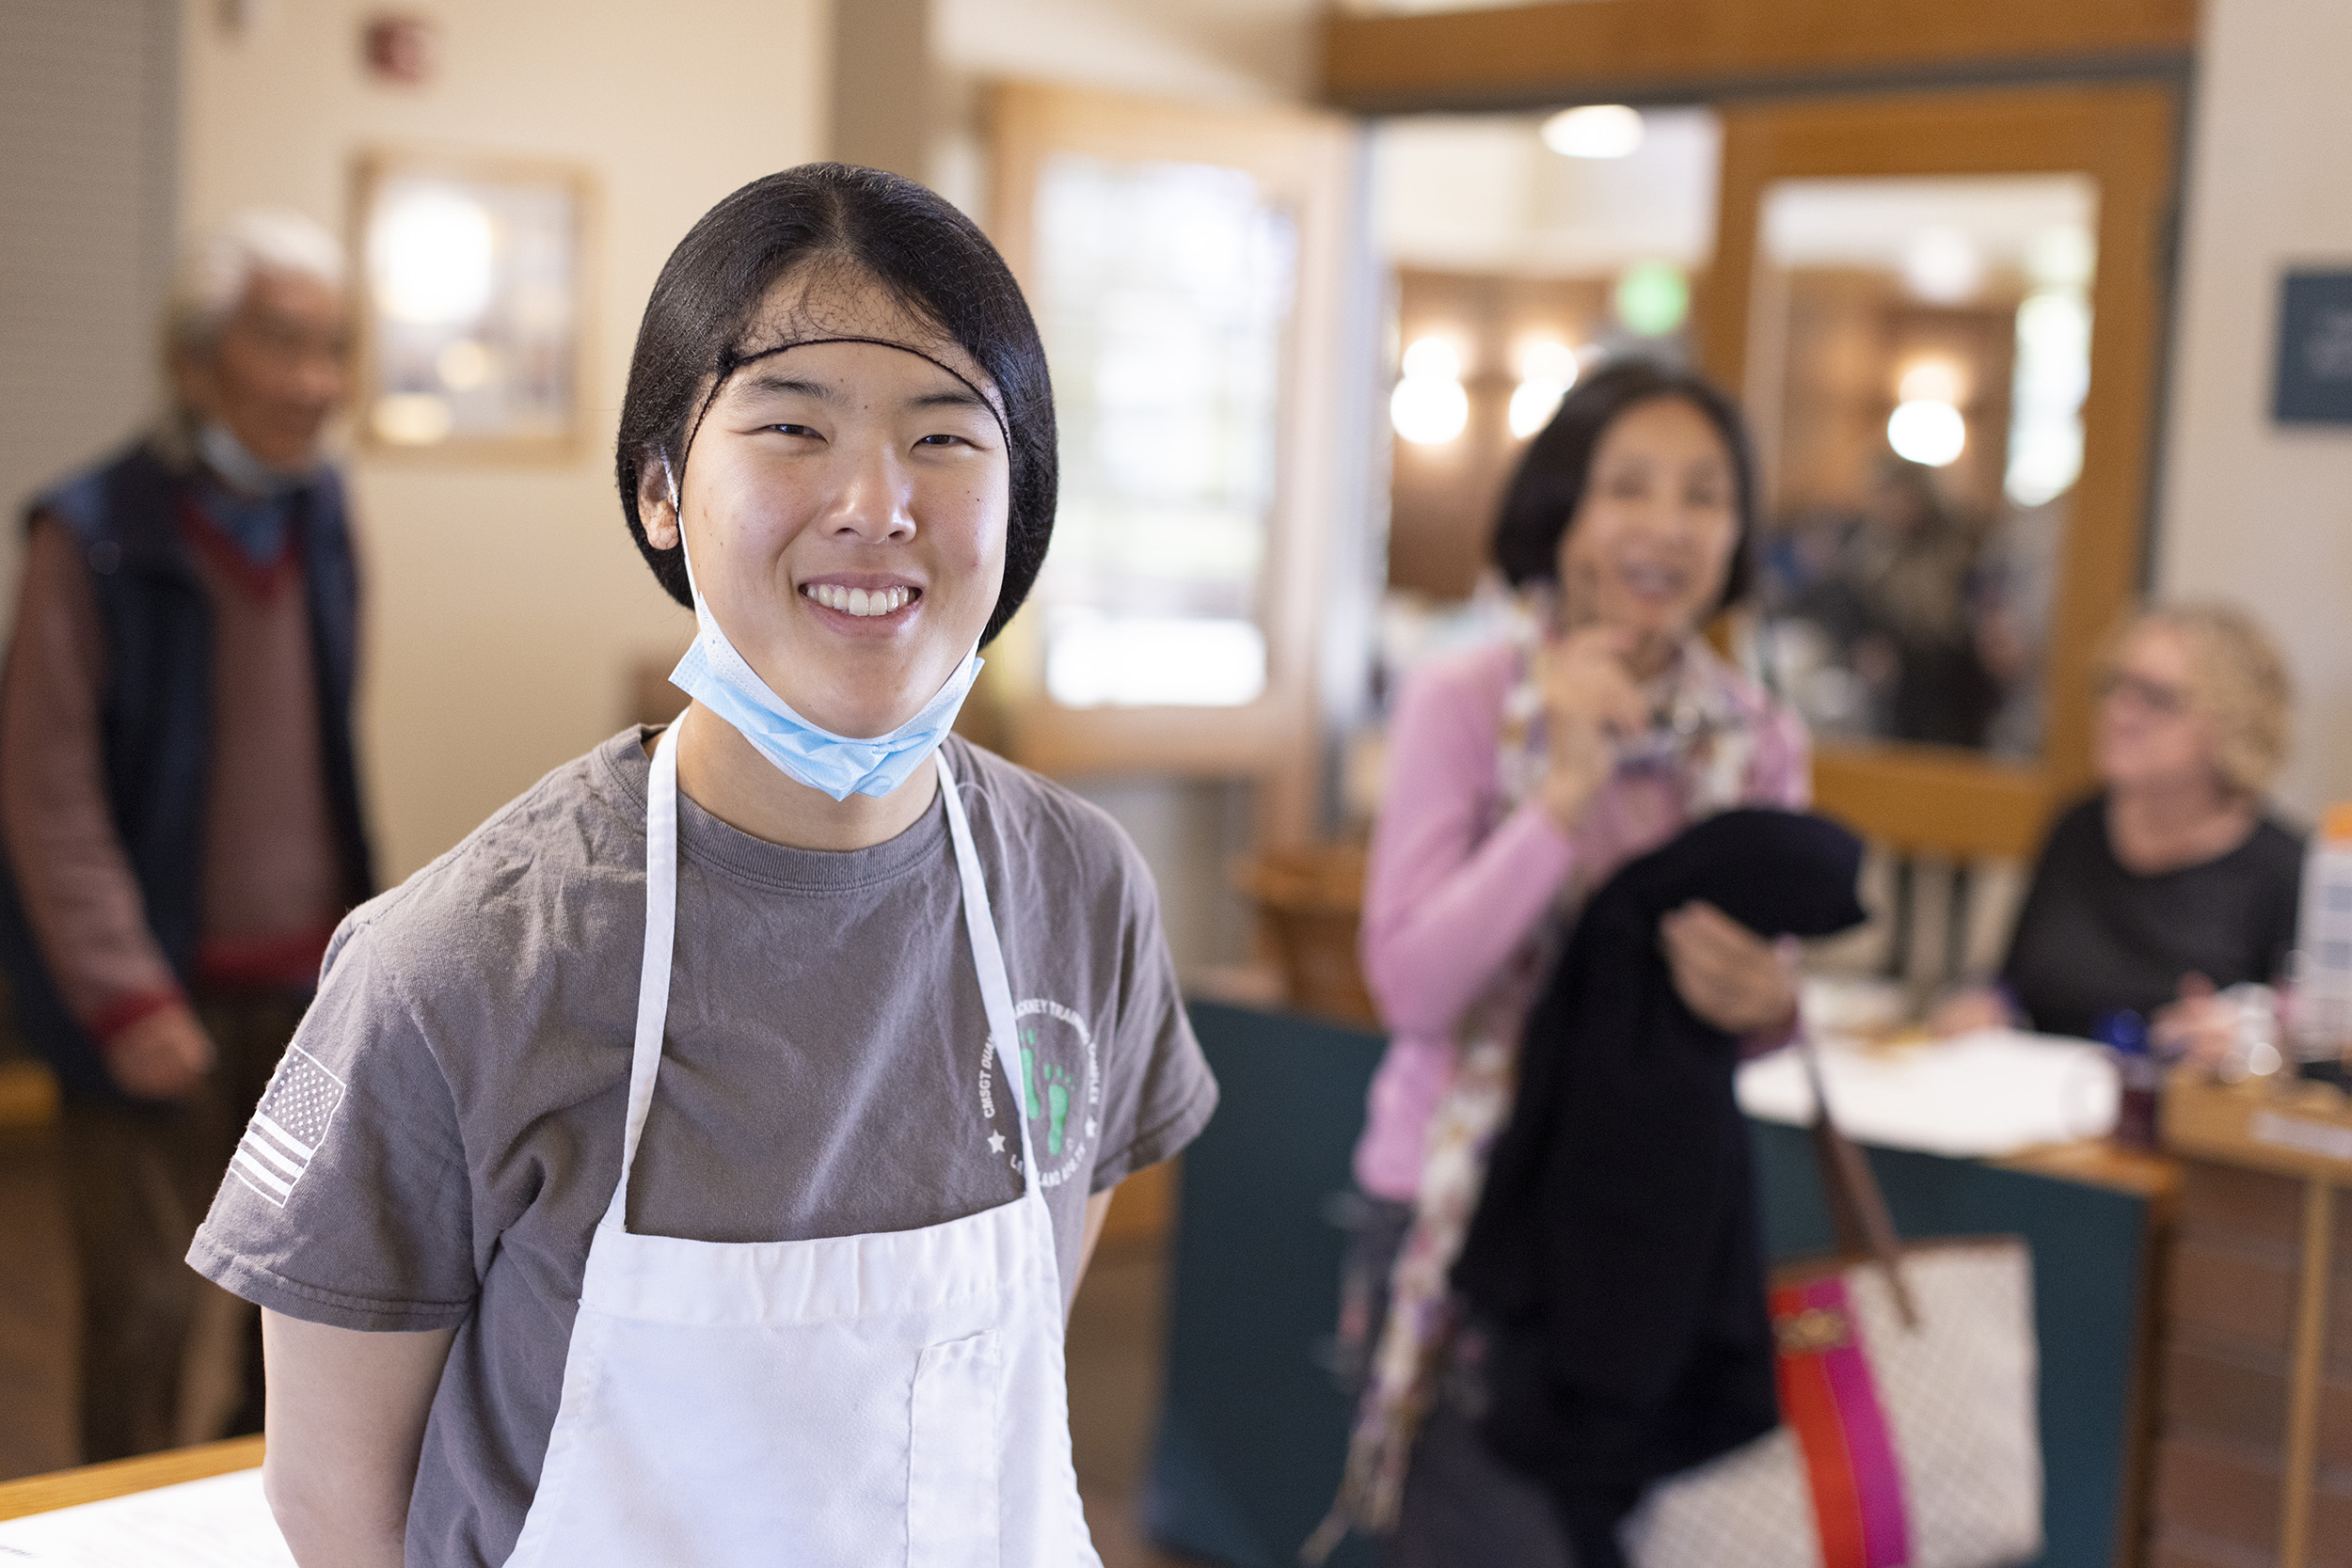 As part of the course requirement, Joanna Hwang ’22 volunteered to serve lunch at the Claremont Joslyn Senior Center.